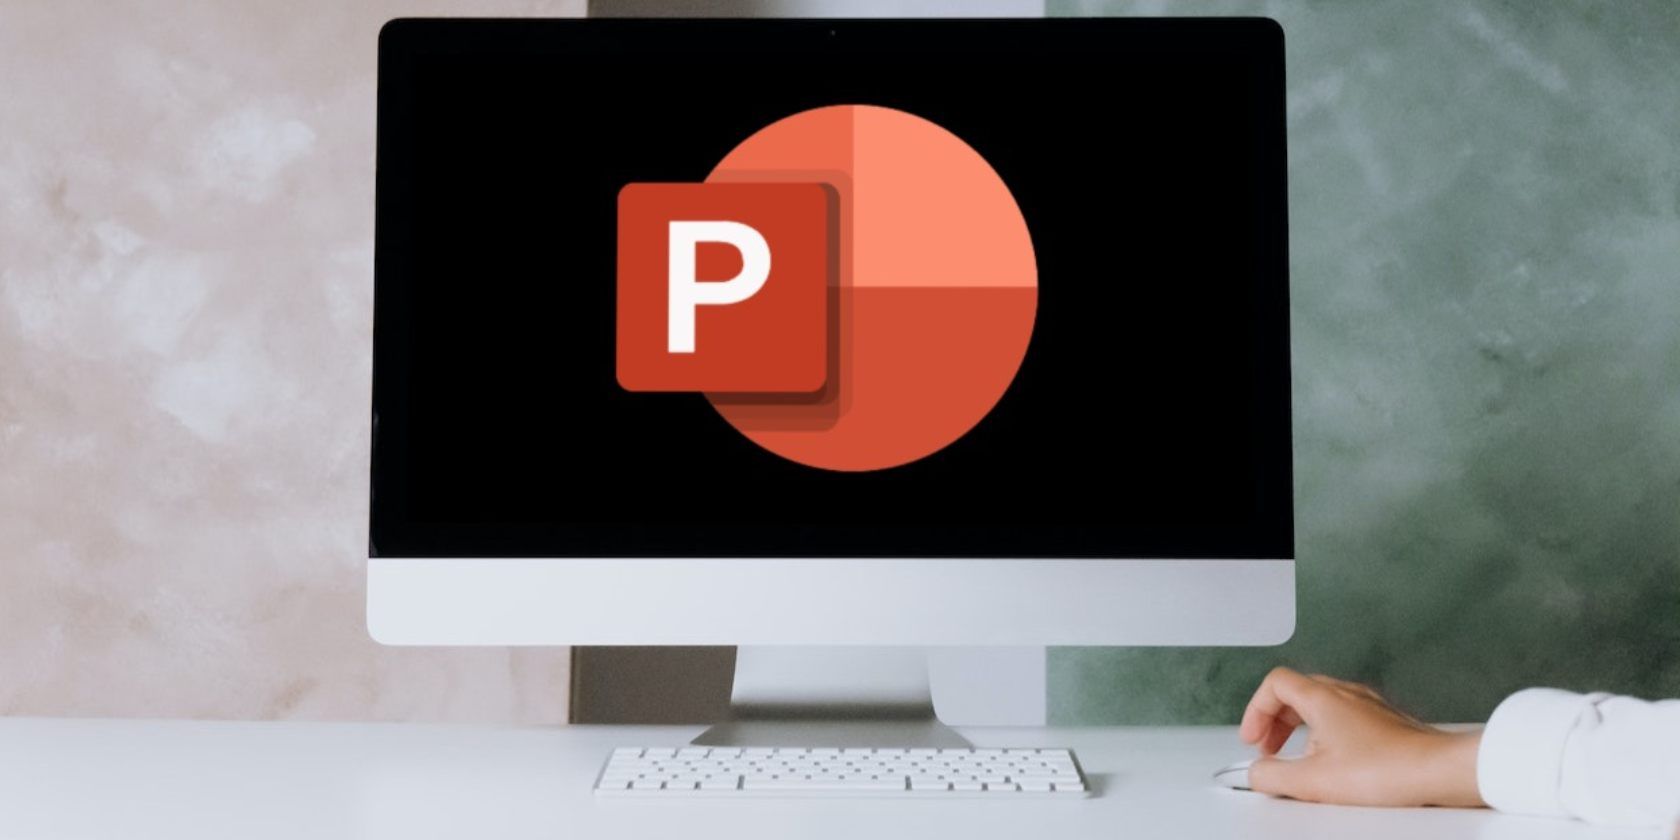 PowerPoint logo on iMac placed on a desk